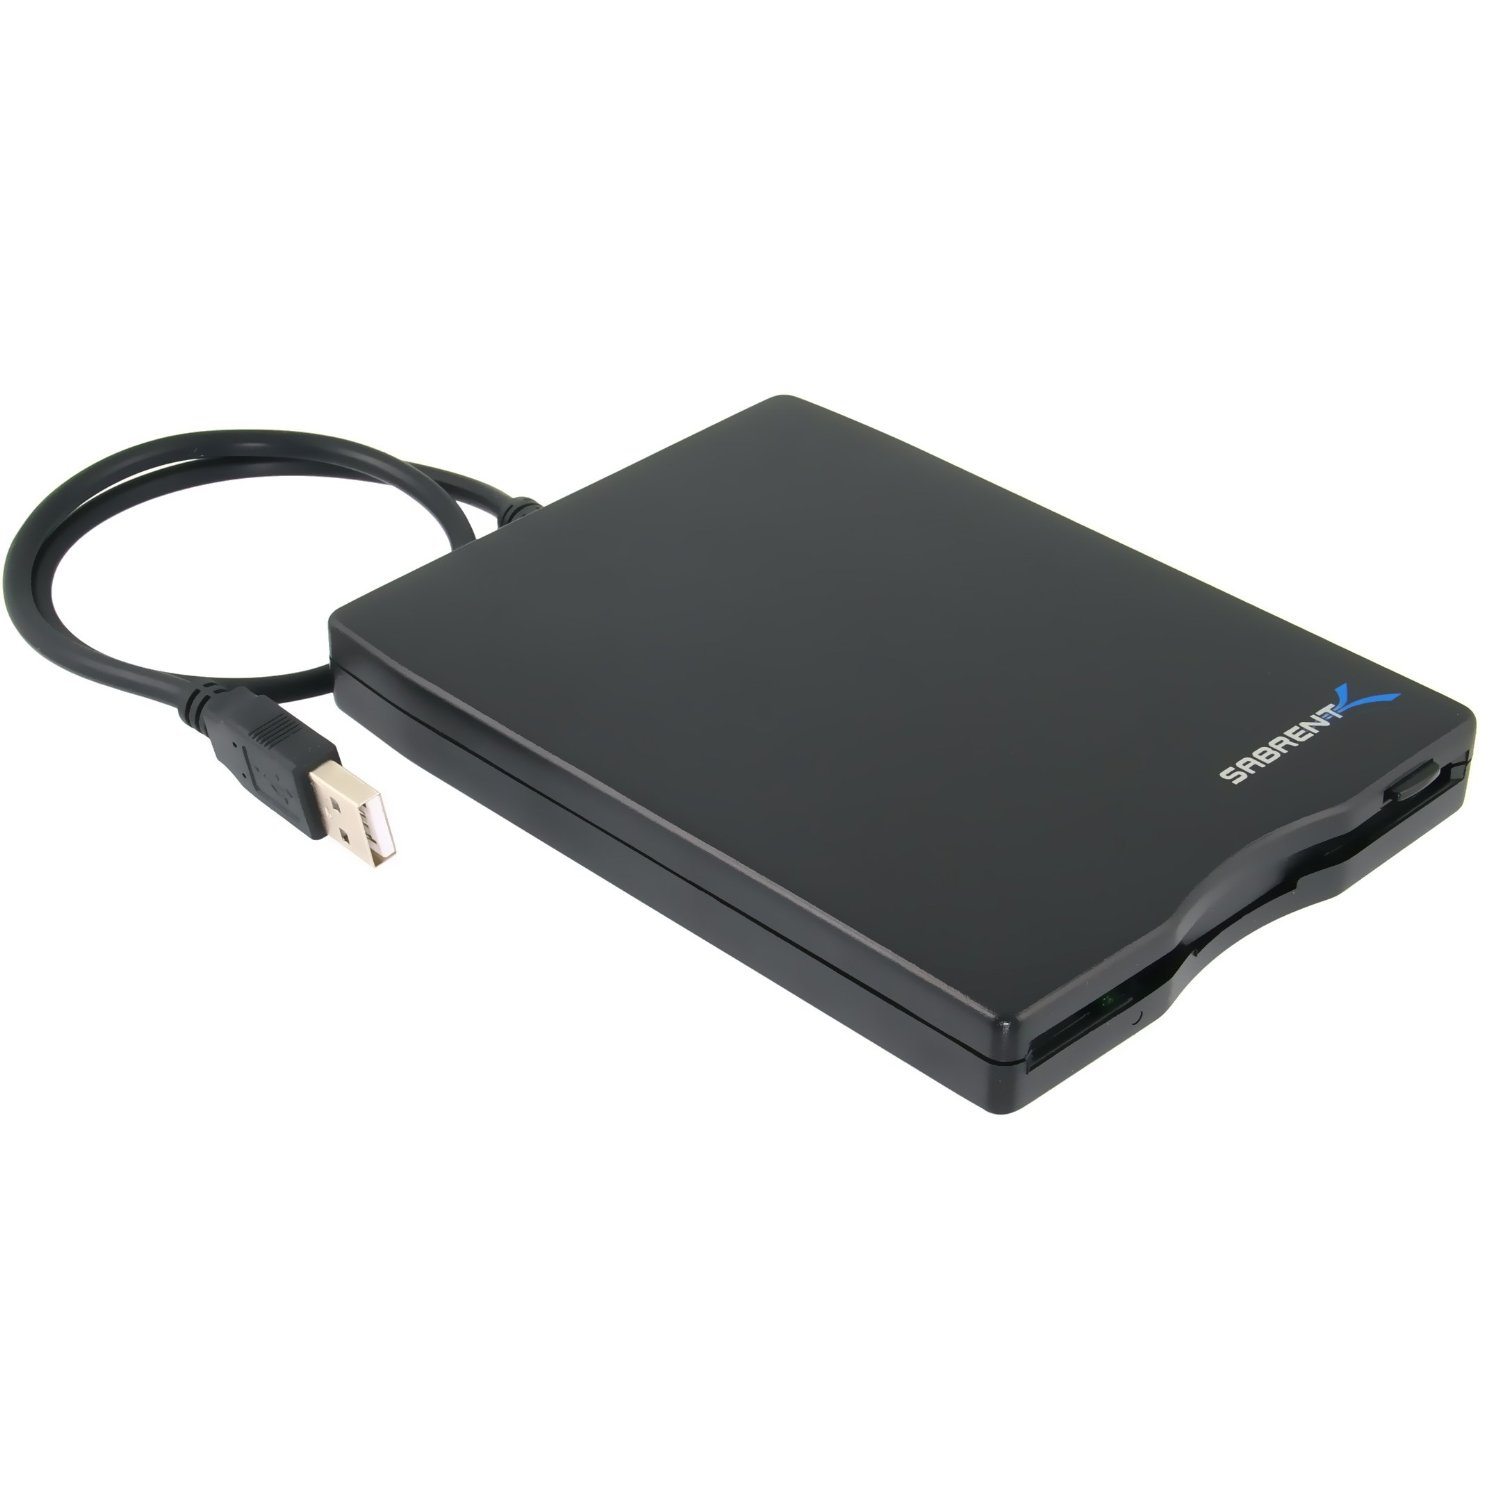 Driver For Usb Floppy Drive